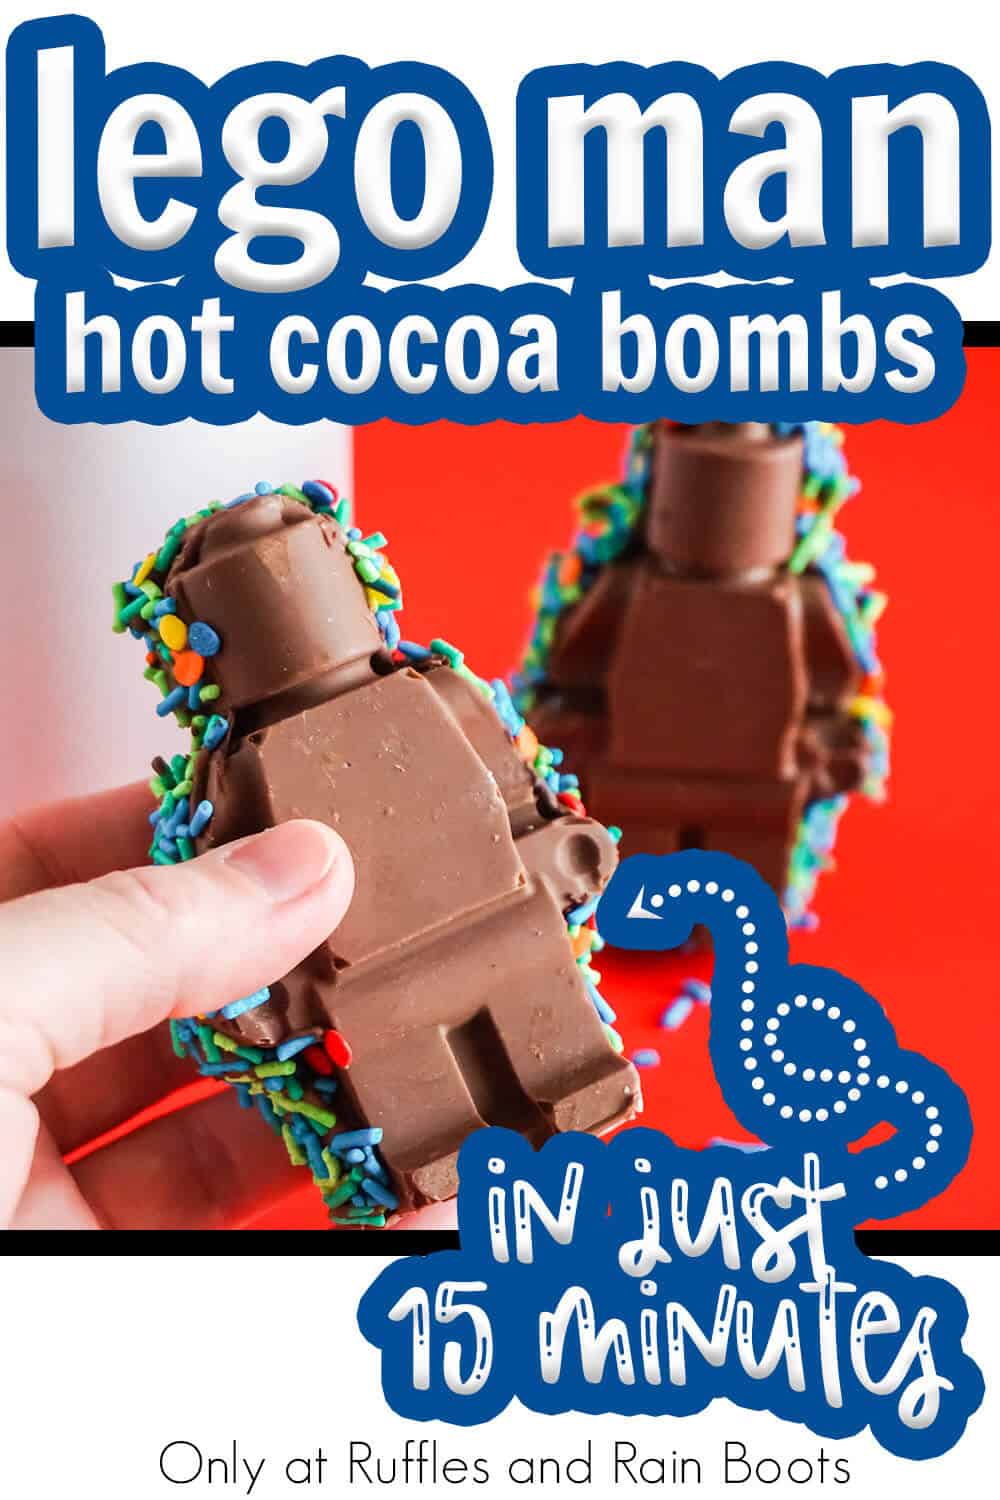 lego men hot cocoa bomb with text which reads lego man hot cocoa bombs in just 15-minutes